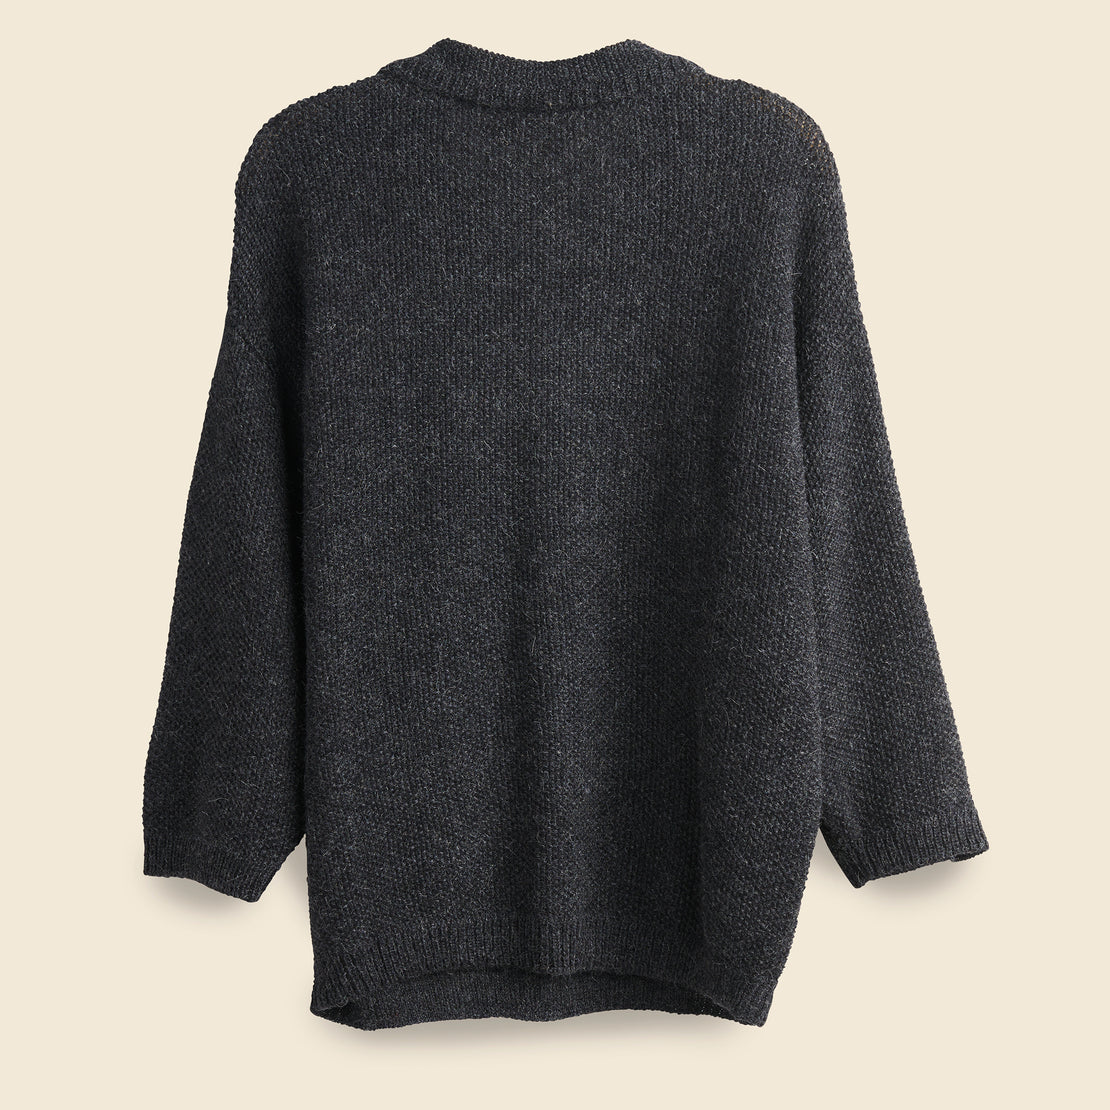 Dolman Henley Sweater - Charcoal - First Rite - STAG Provisions - W - Tops - Sweater